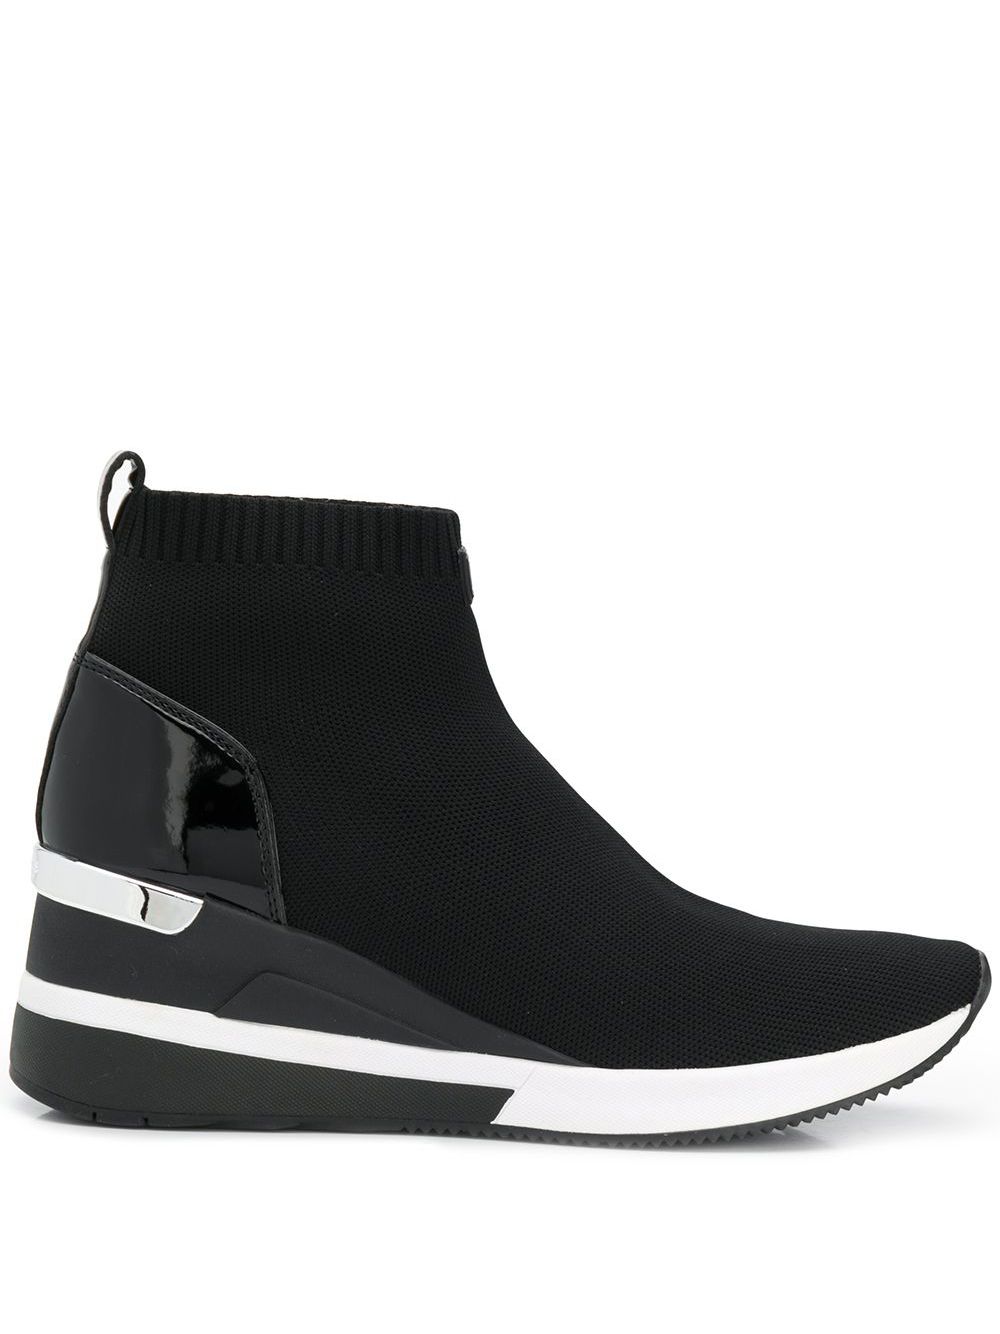 Shop Michael Michael Kors Skyler high-top sneakers with Express Delivery -  FARFETCH